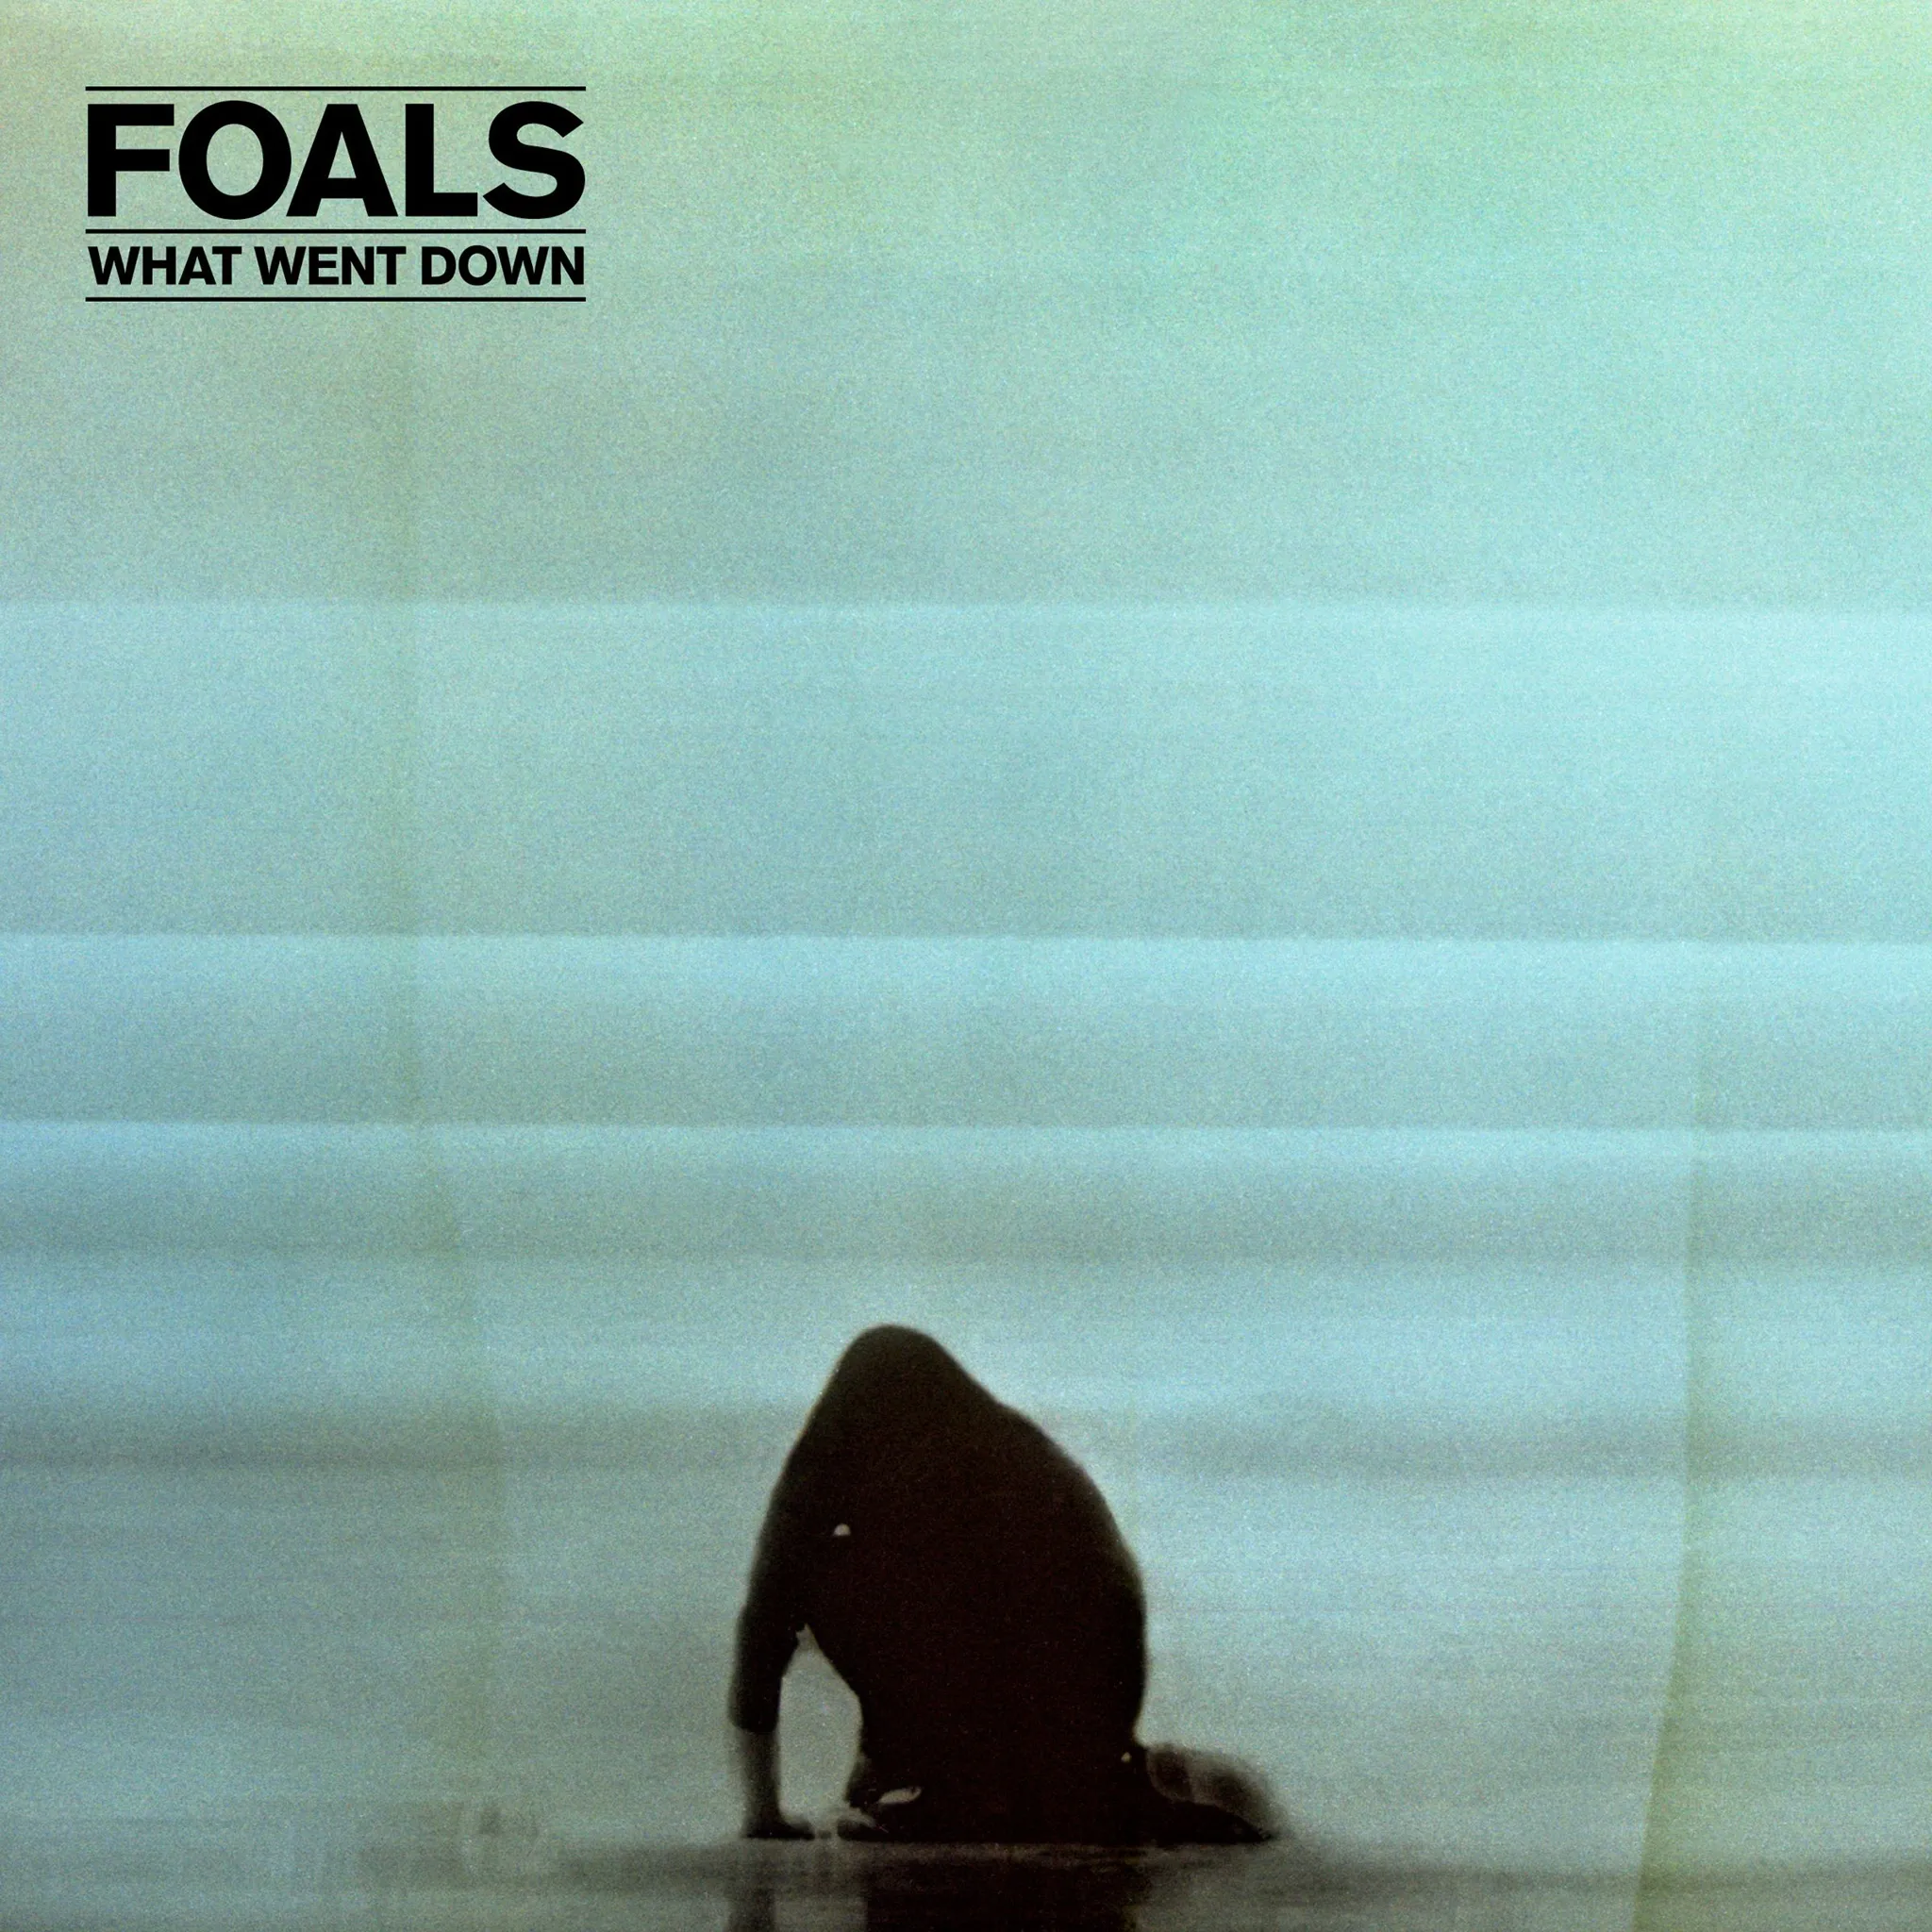 Foals - What Went Down artwork